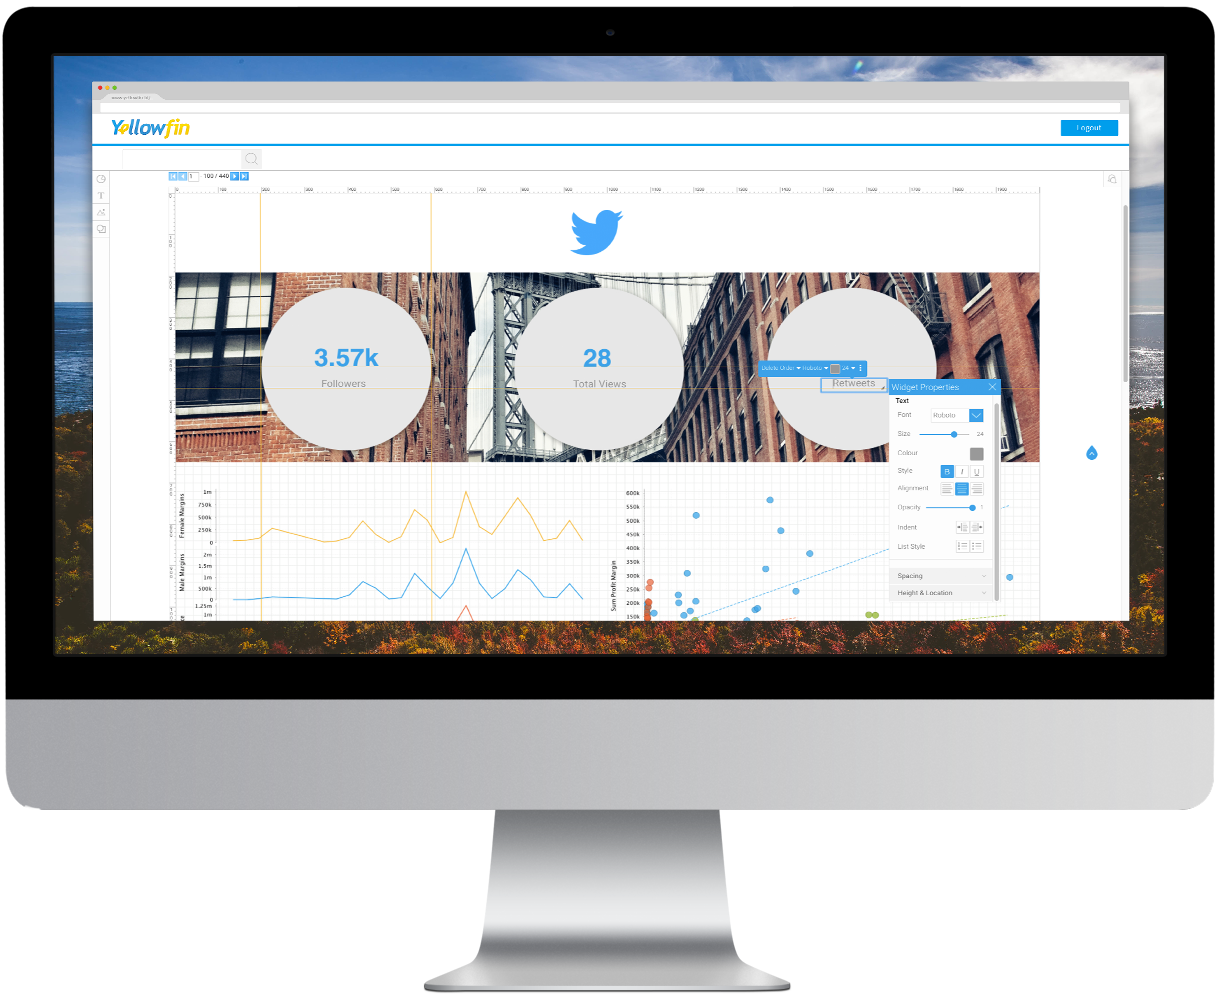 Yellowfin releases new Twitter dashboard that can analyze competitor data